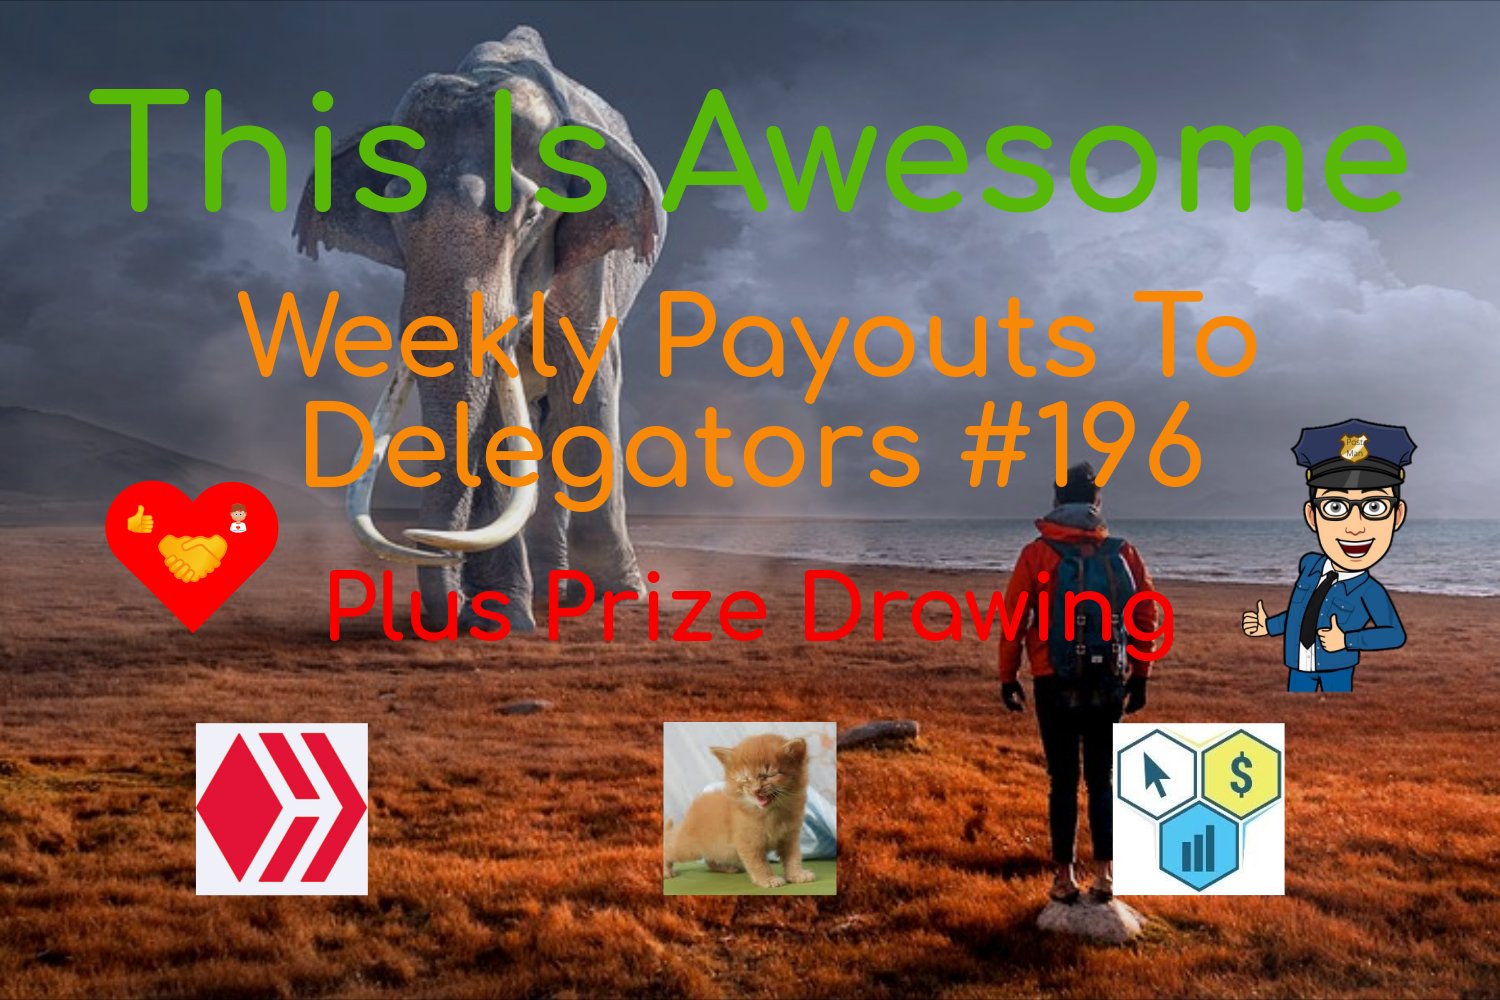 @thisisawesome/this-is-awesome-weekly-payouts-to-delegators-196-plus-prize-drawing